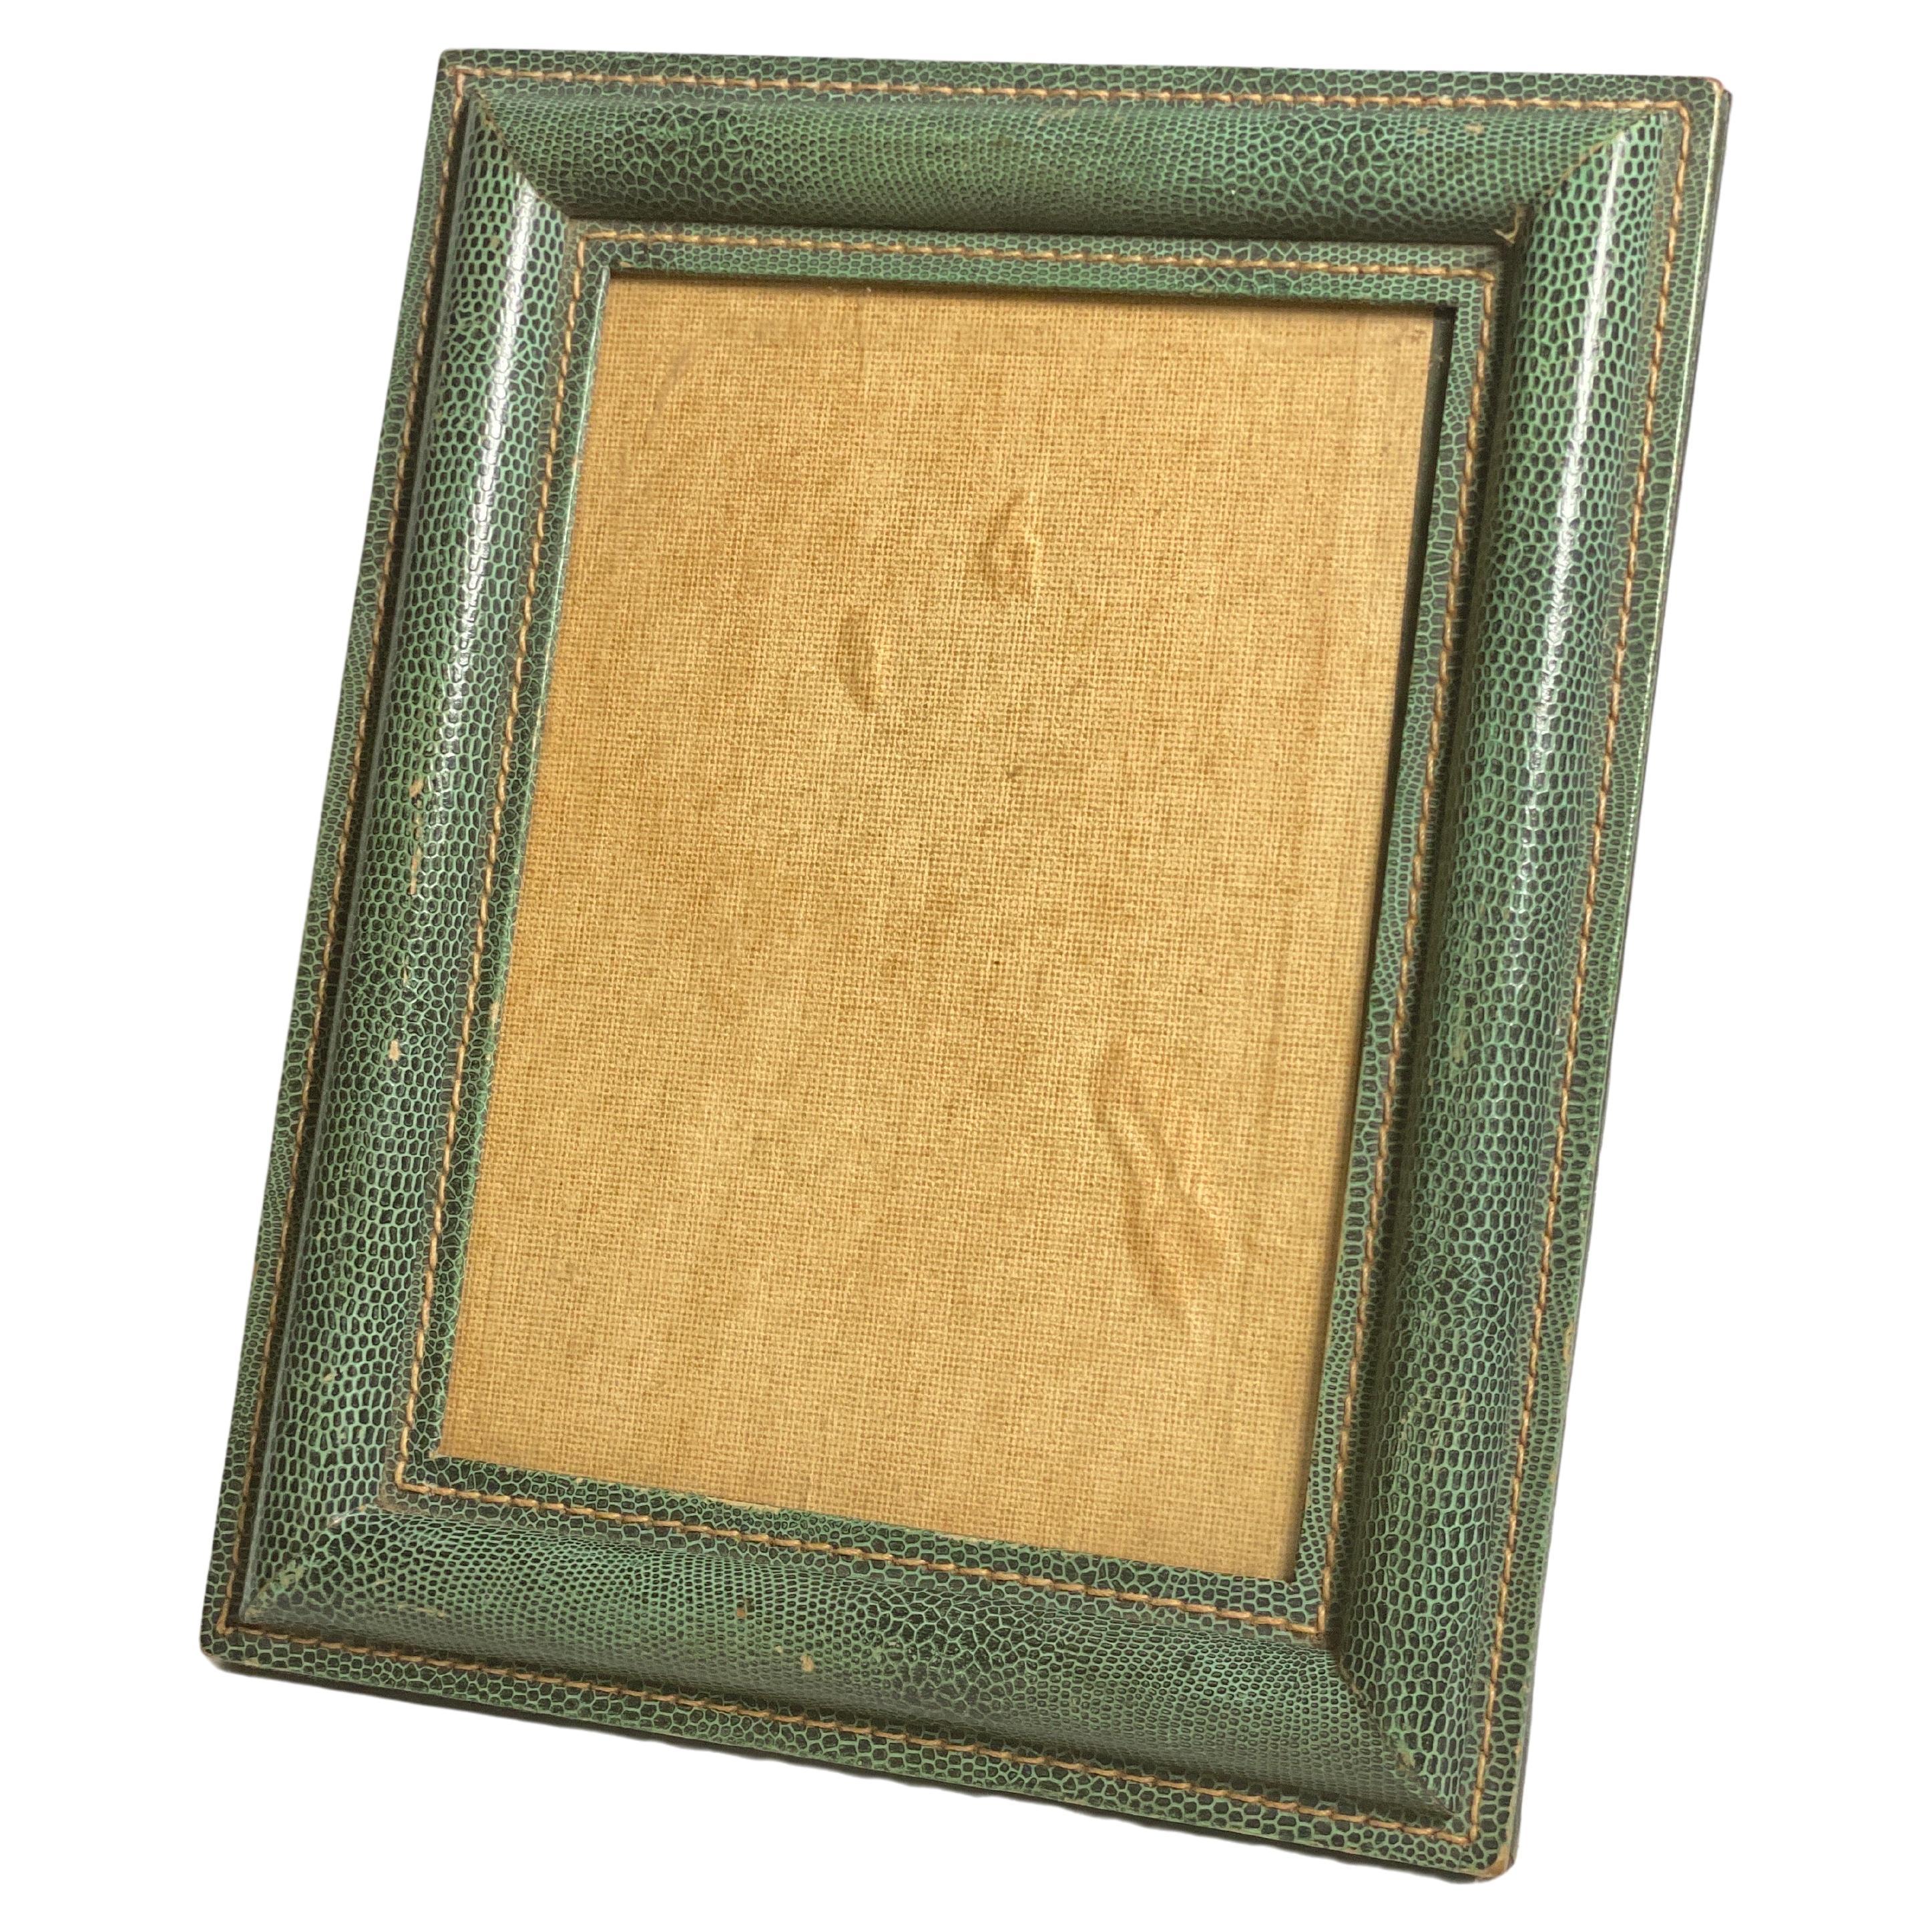 Jacques Adnet Style, Green Stitched Leather Picture Frame, France 1940 For Sale